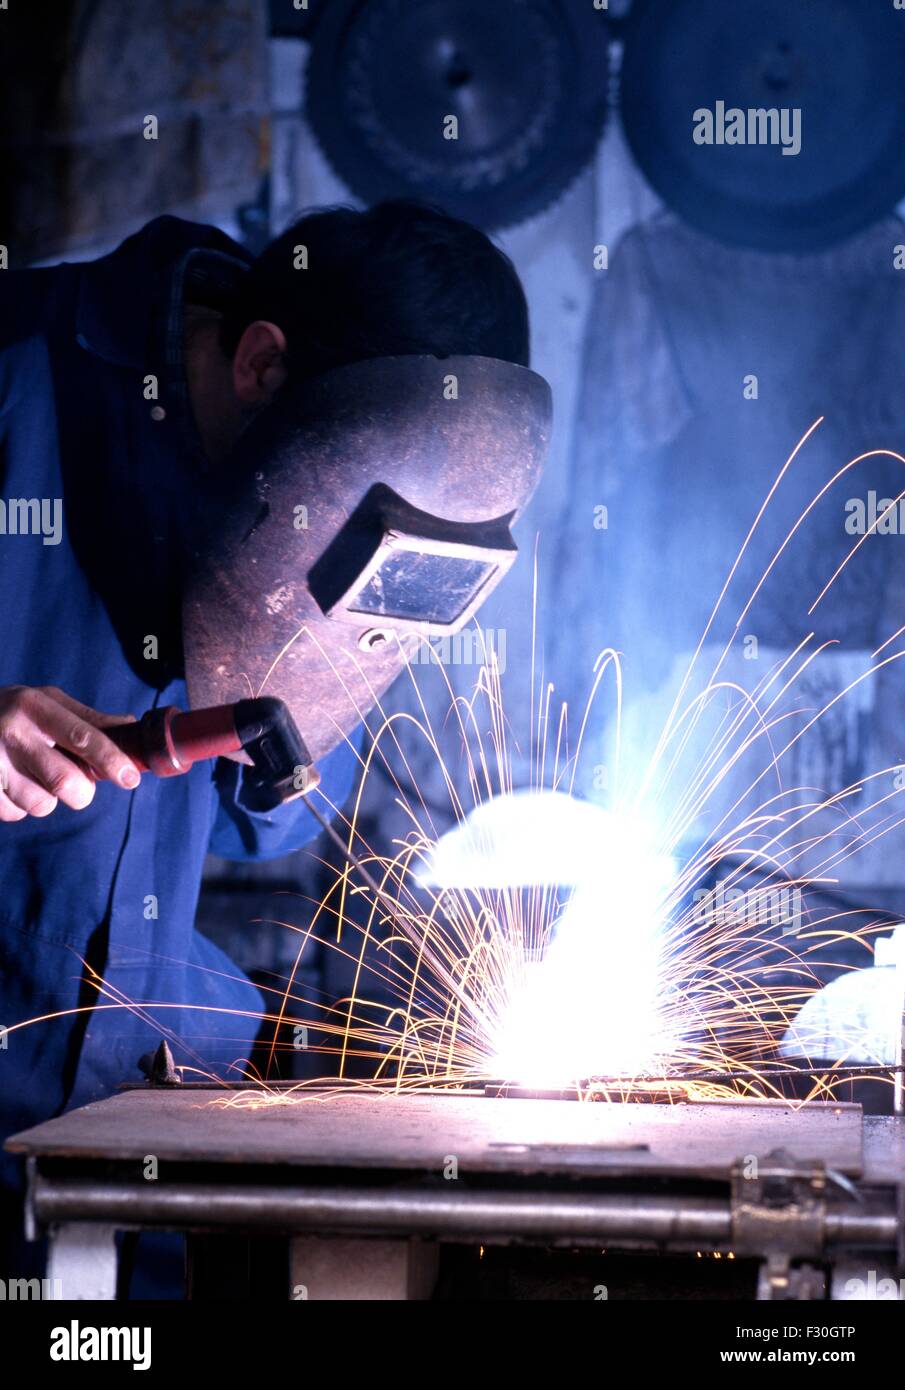 Man welding wearing protective clothing in a workshop., England, UK, Western Europe. Stock Photo